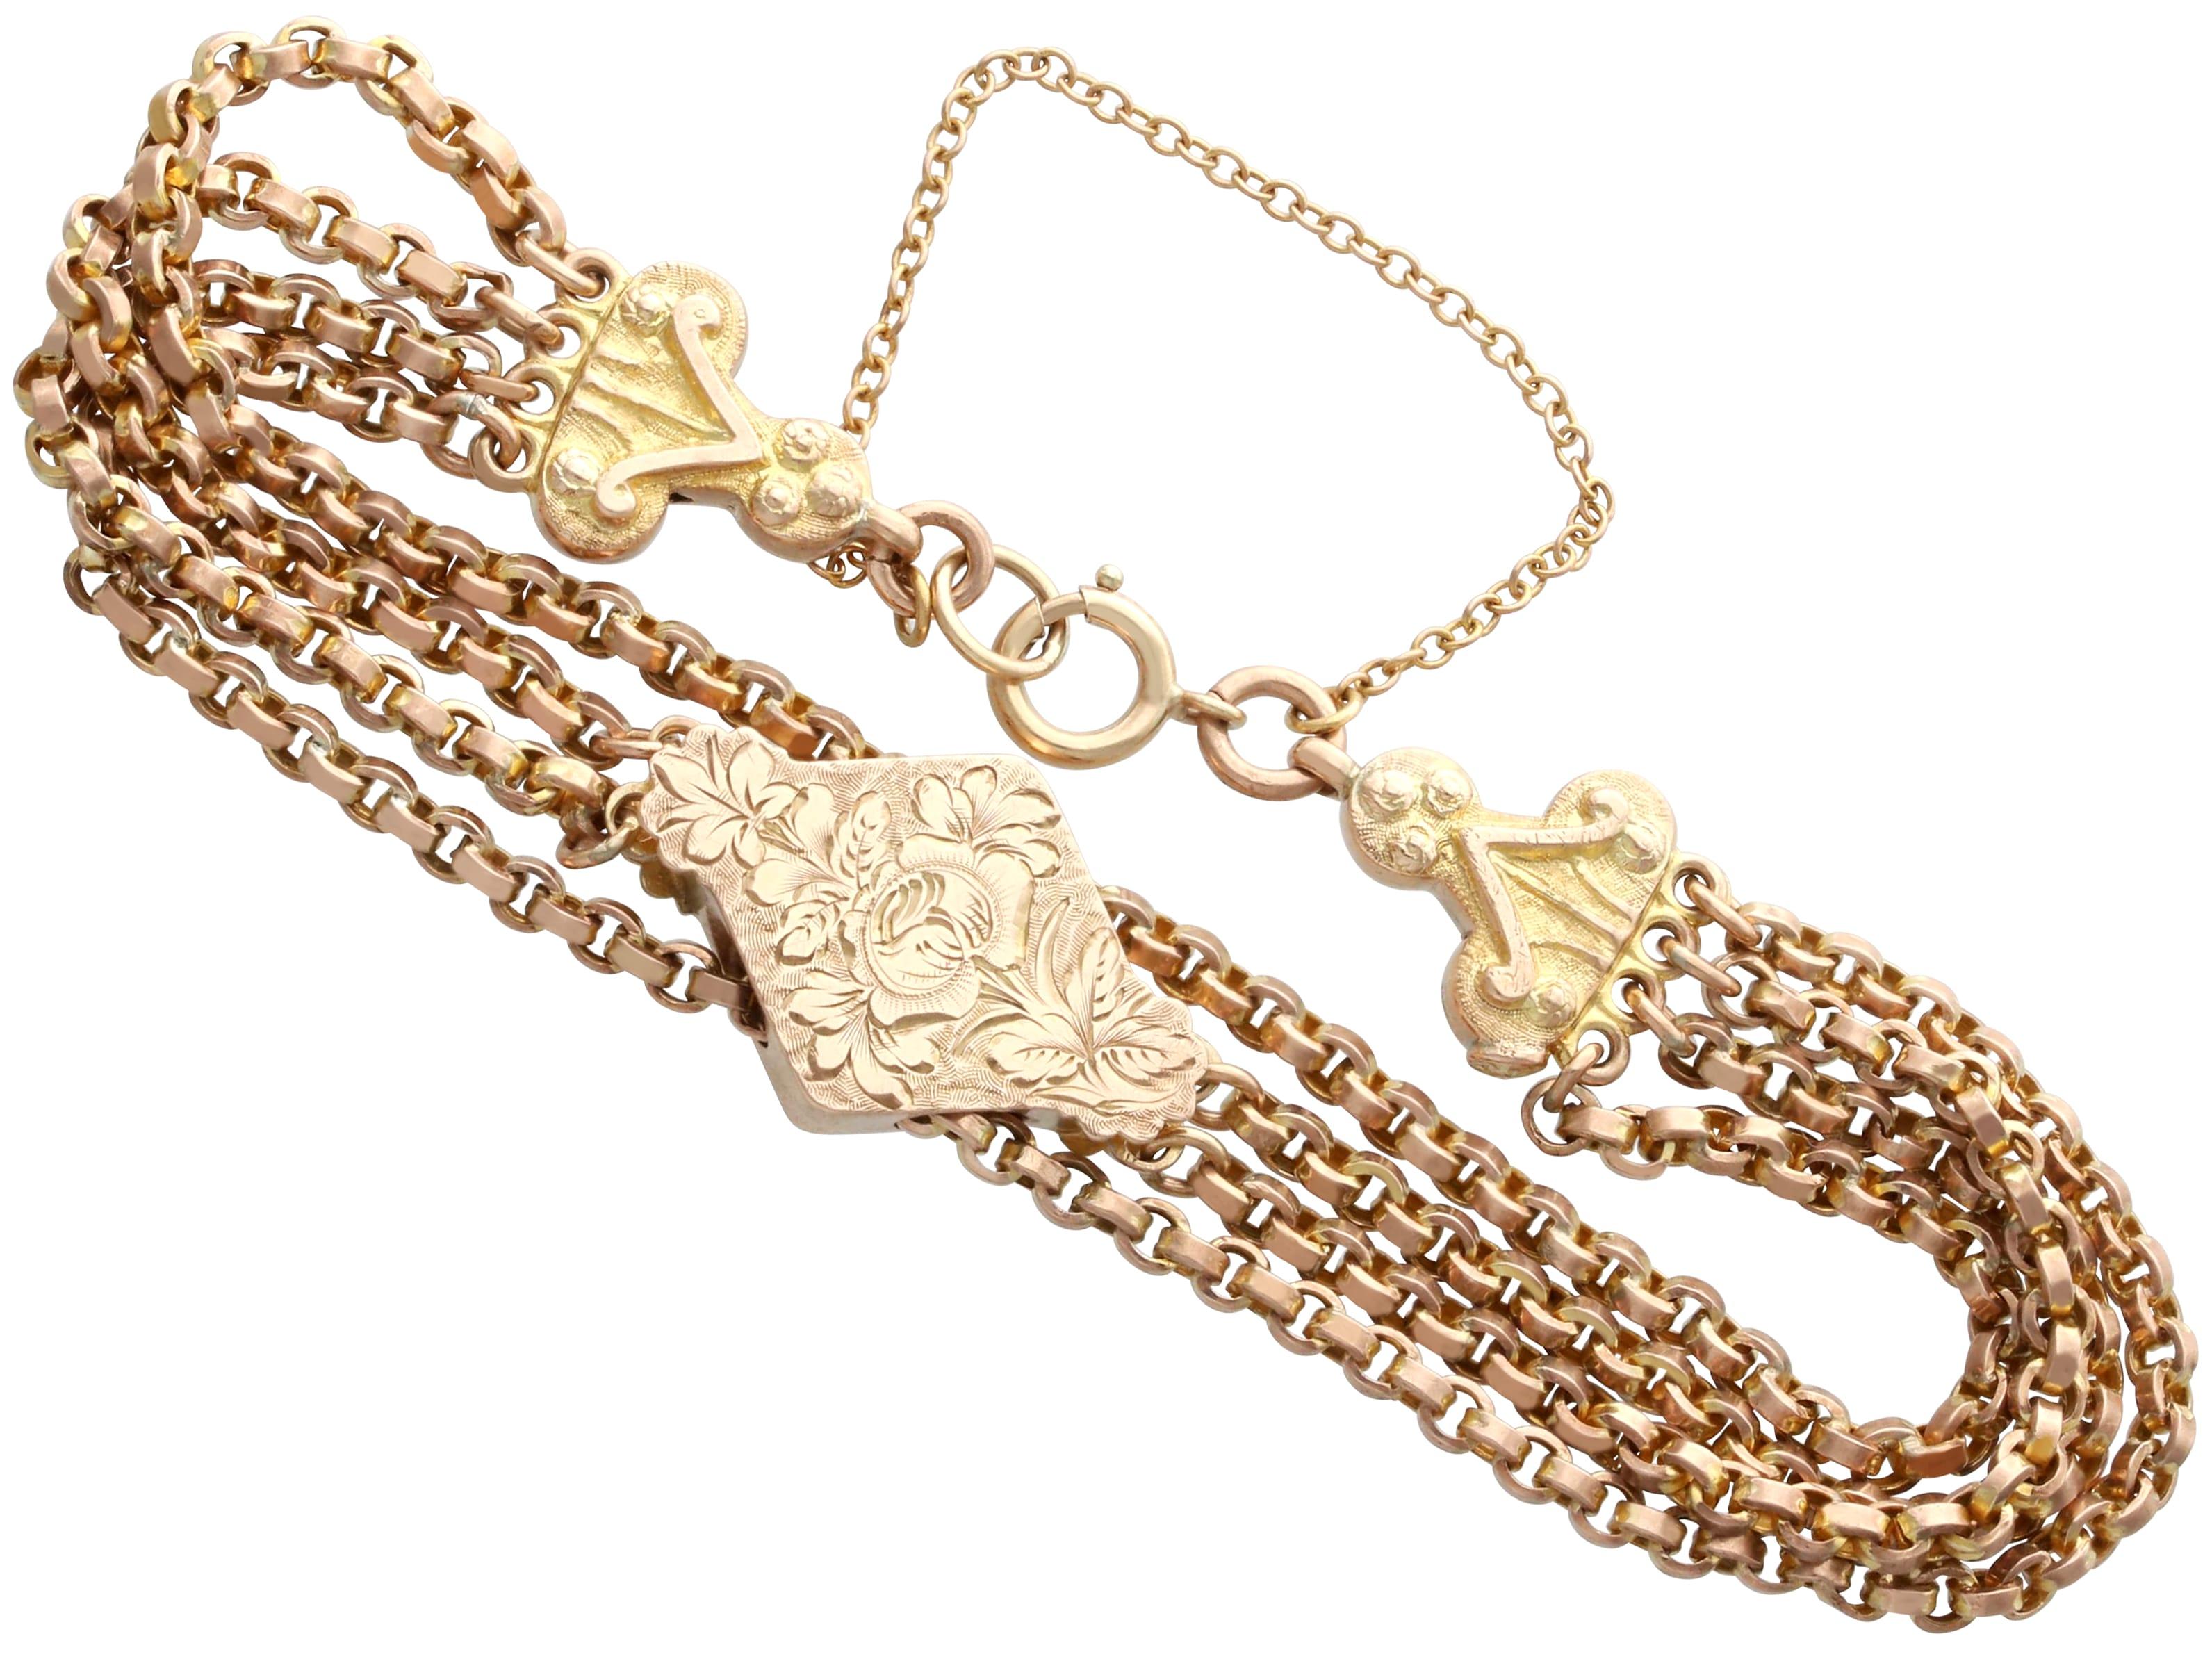 Antique 9k Yellow Gold Chain Bracelet Circa 1890 In Excellent Condition For Sale In Jesmond, Newcastle Upon Tyne